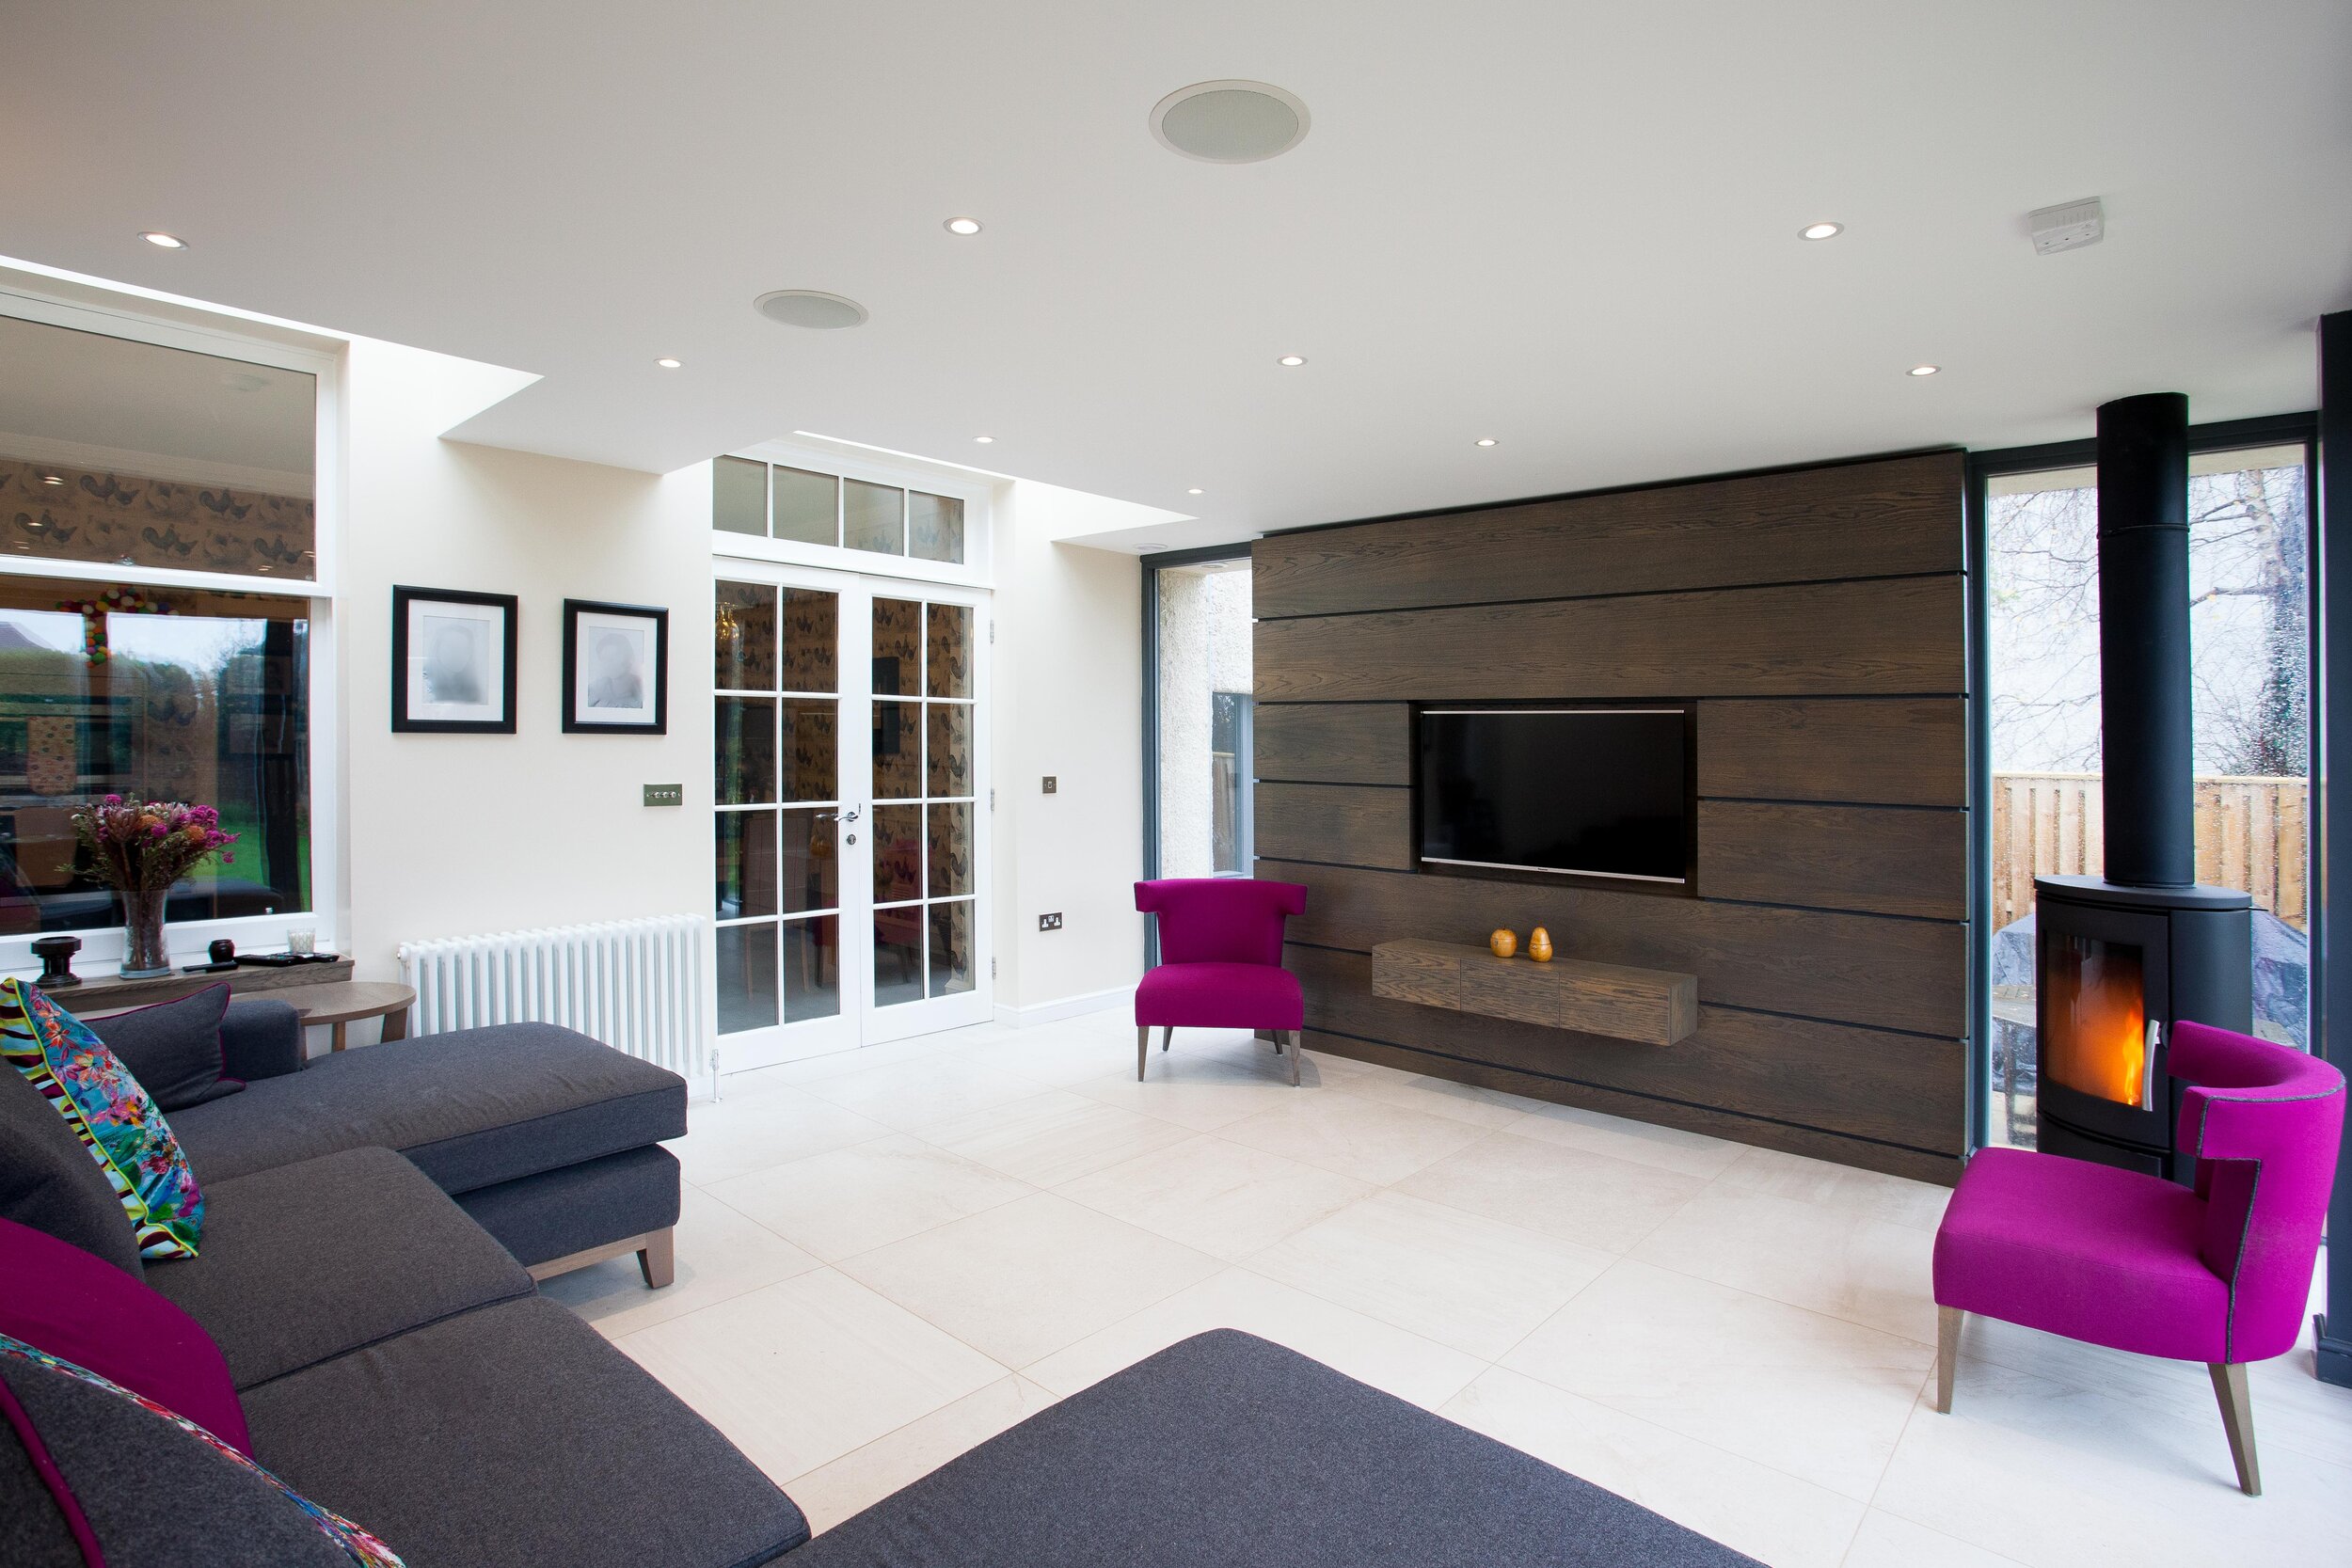  Bespoke panelling and furnishings were by Charlotte James Interiors. 